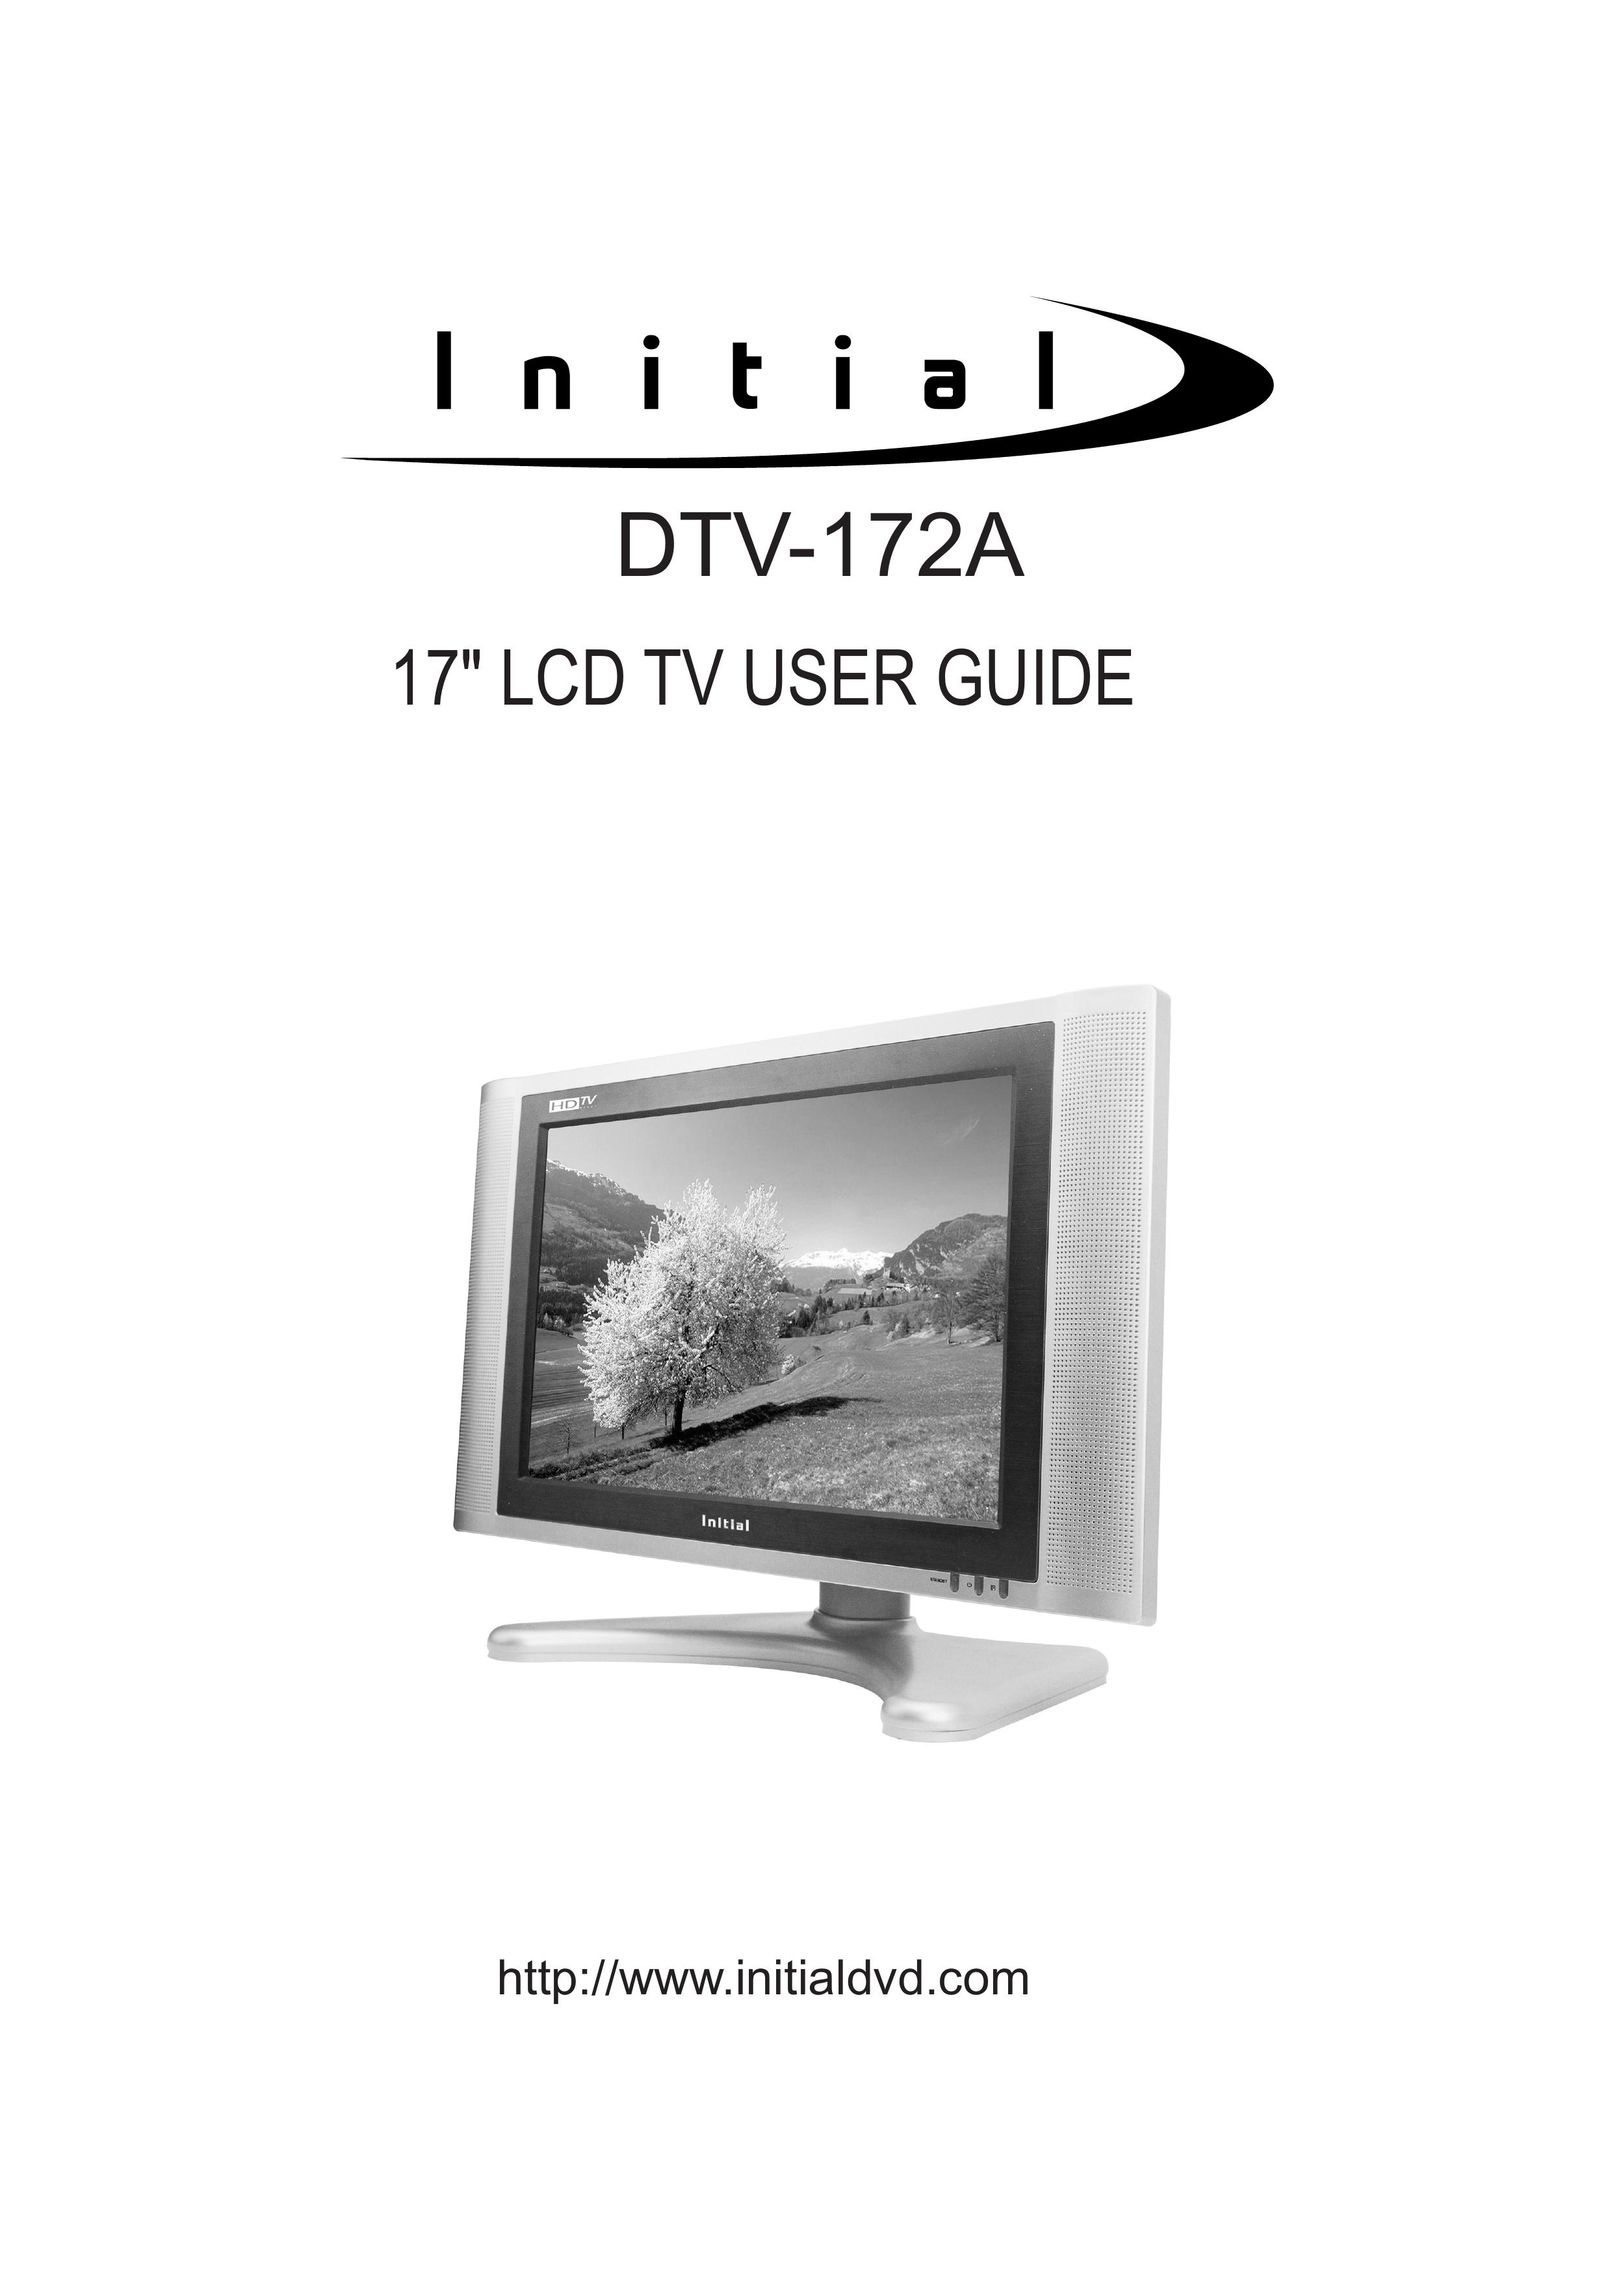 Initial DTV-172A Flat Panel Television User Manual